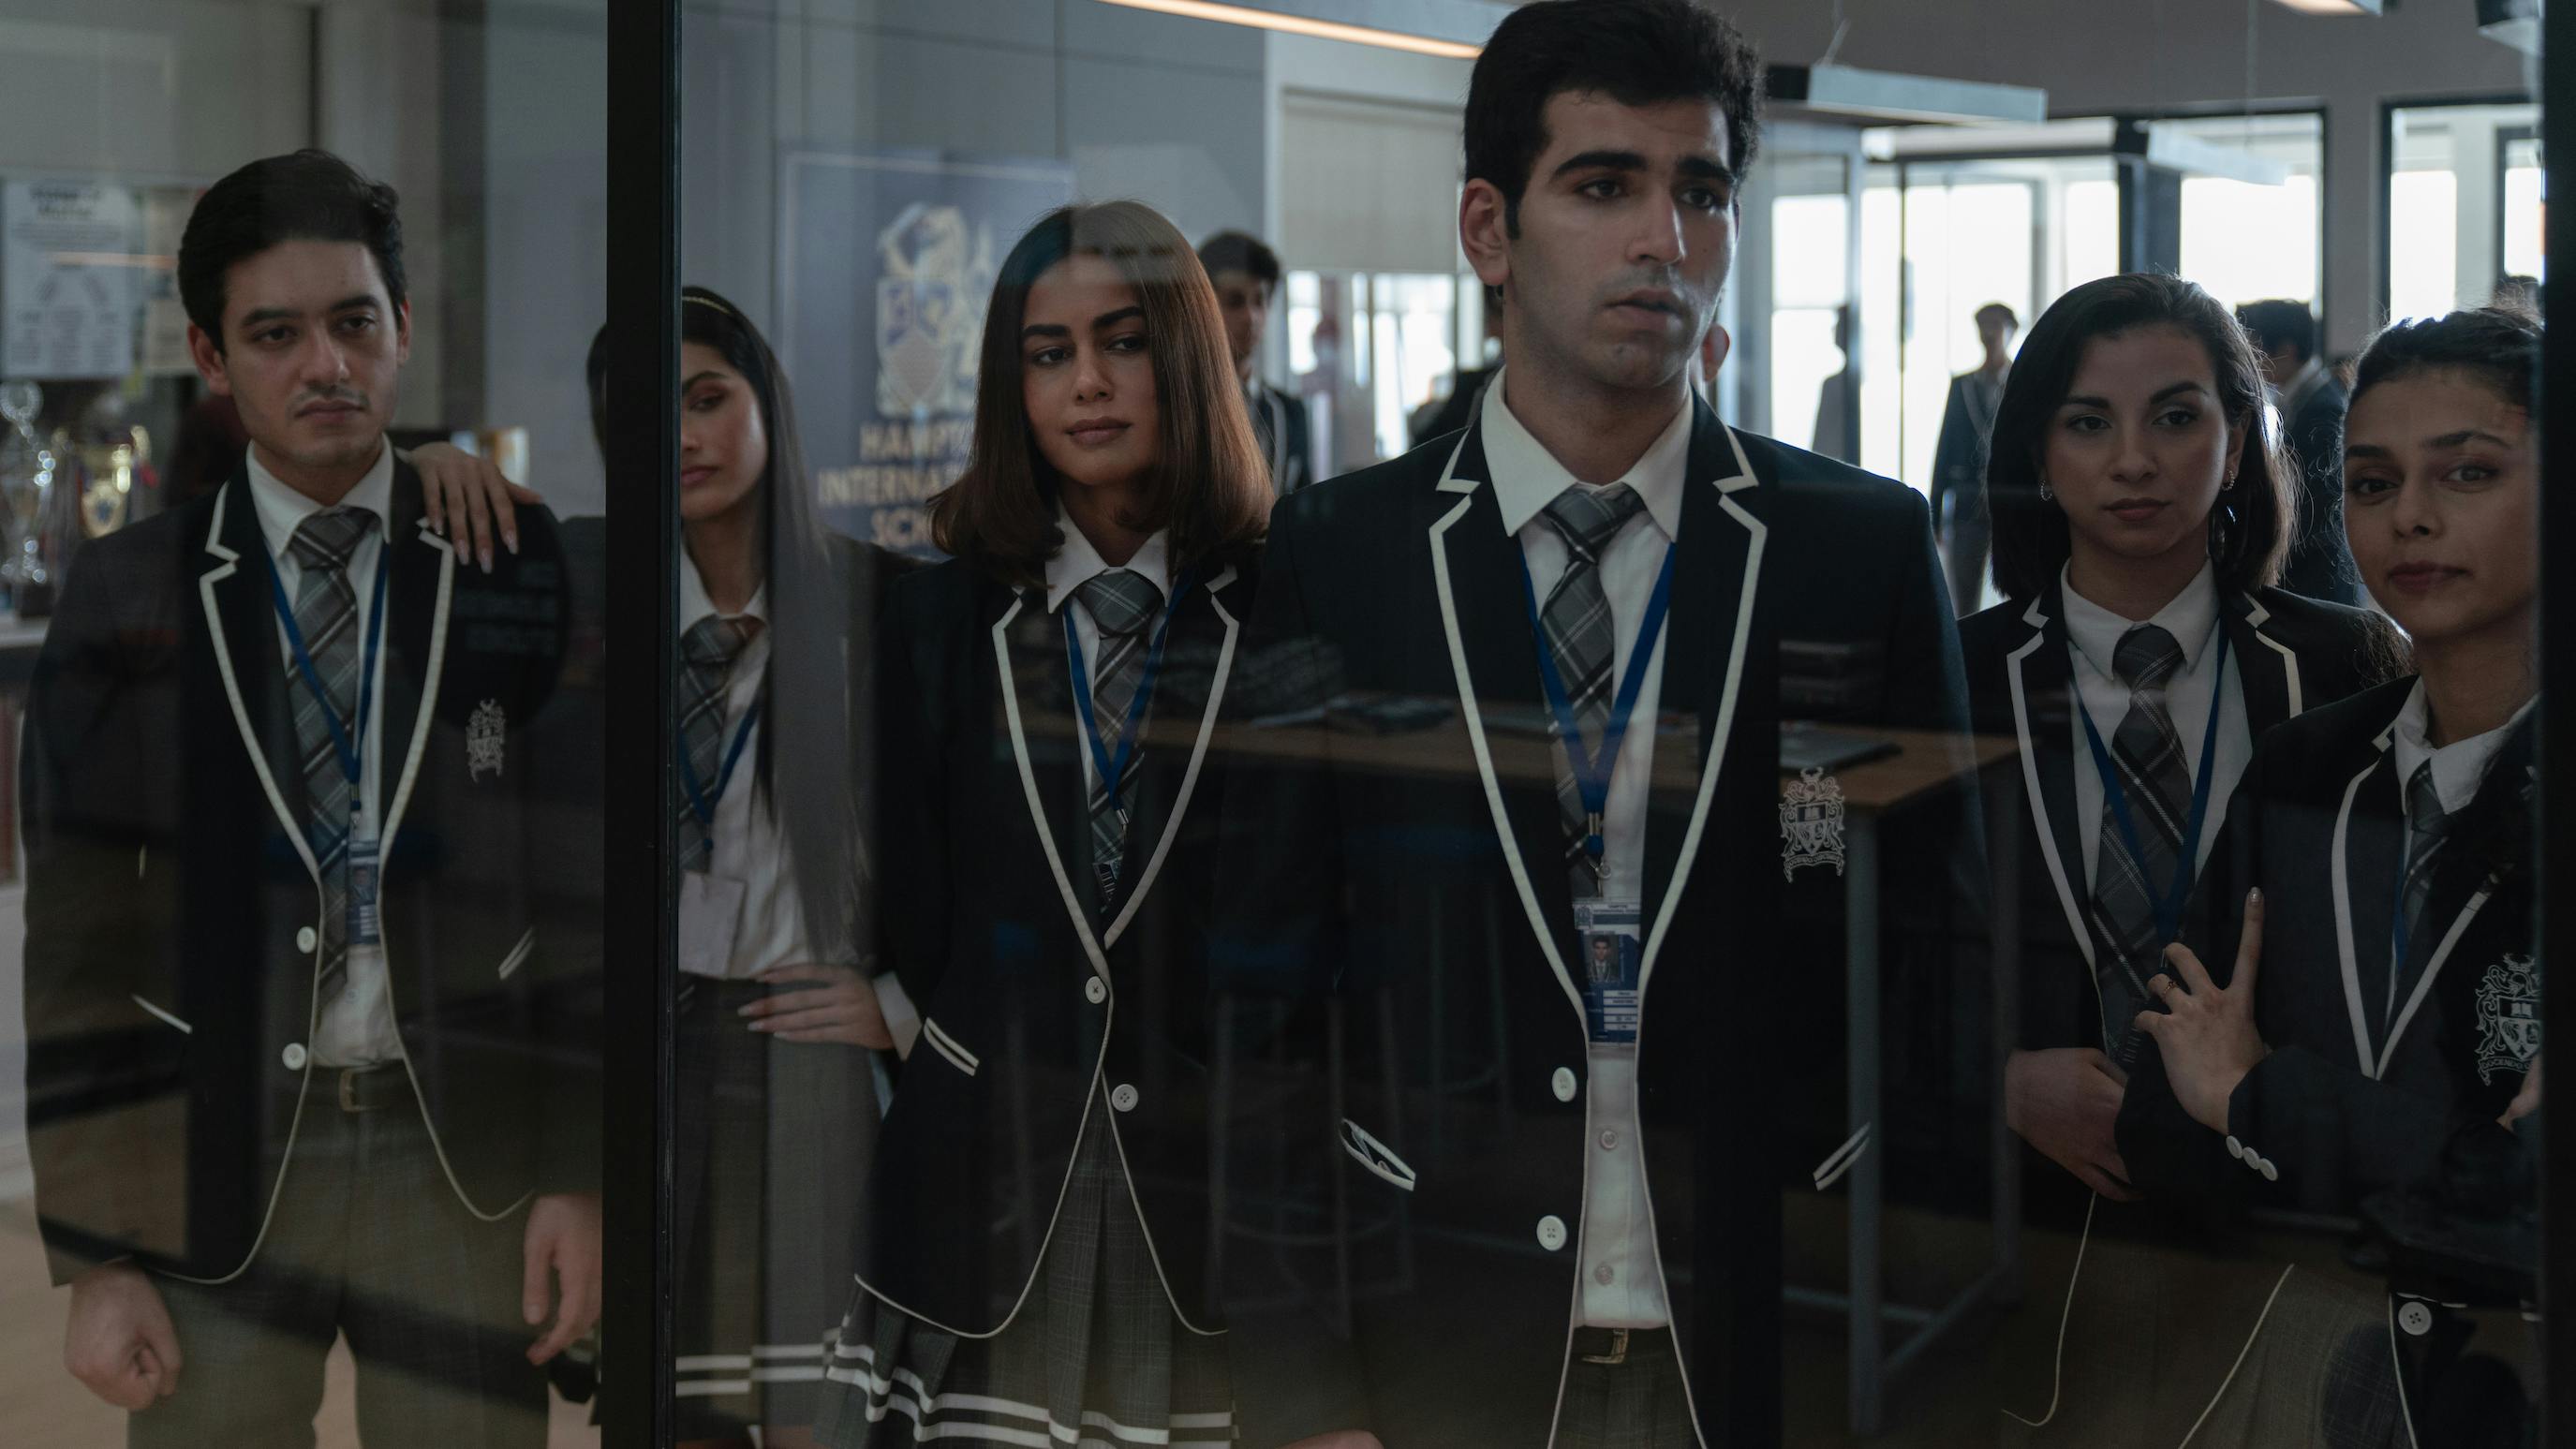 A line of students looks through a glass window. They all wear uniforms: grey skirts, grey pants, navy blazers, white shirts, blue lanyards, and plaid ties. 